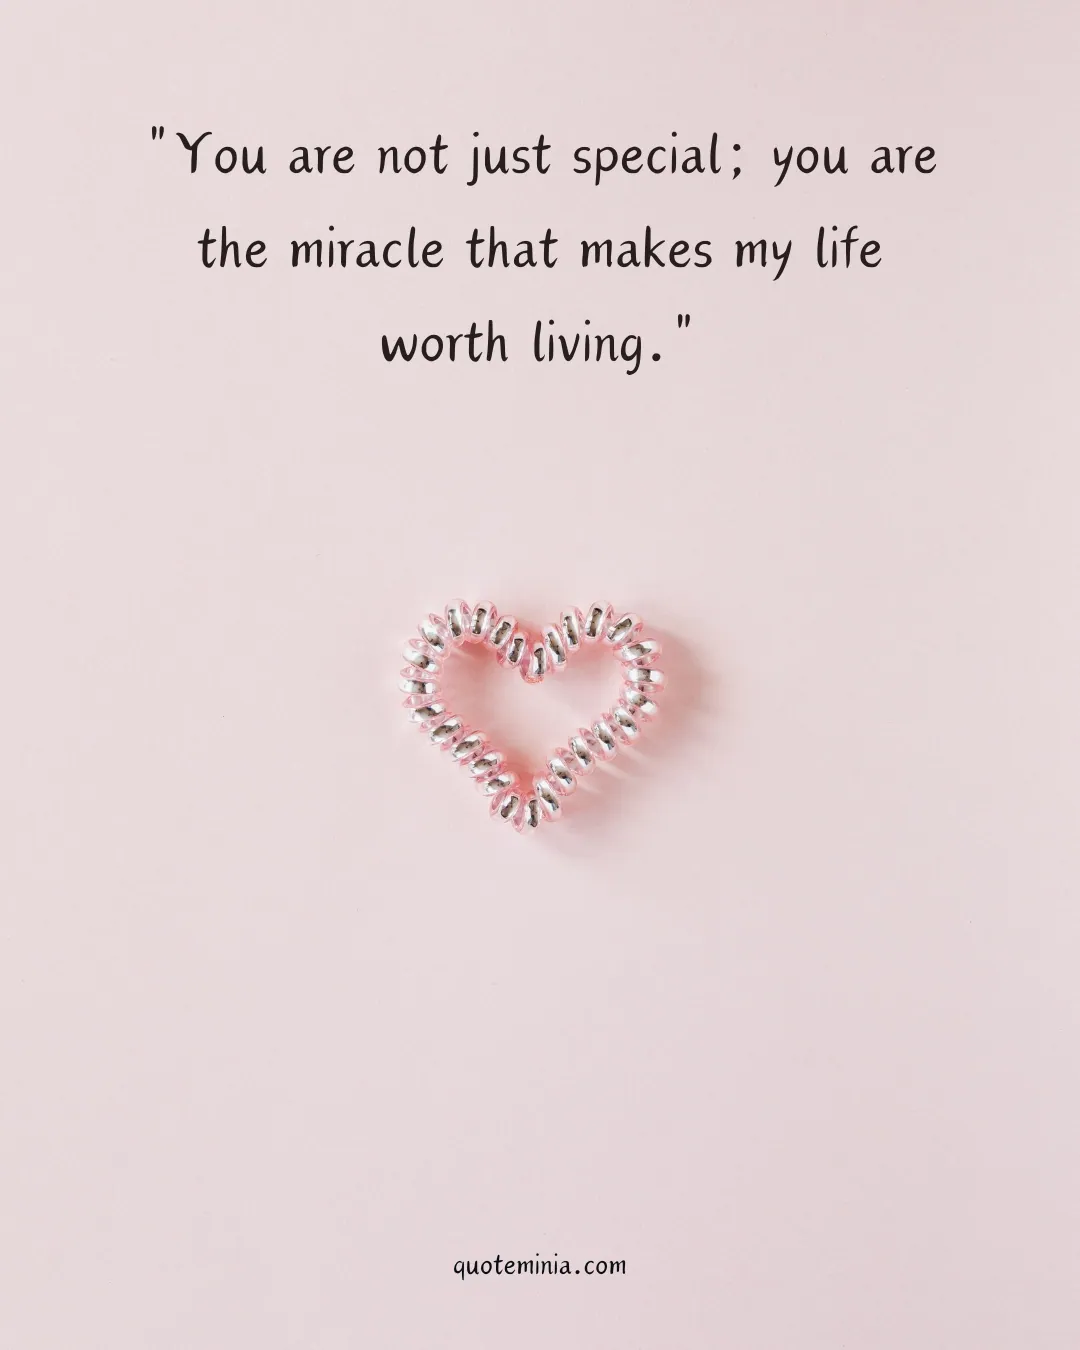 You Are Special Quotes Image 6